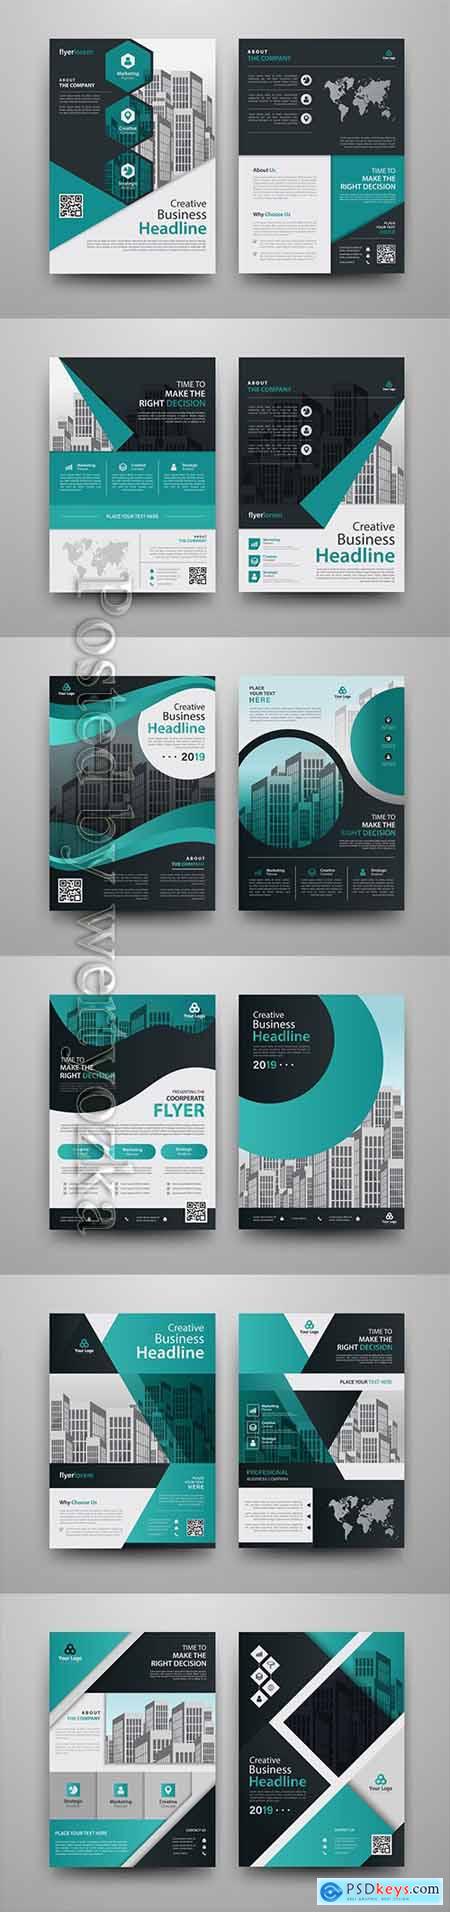 Business vector template for brochure, annual report, magazine692